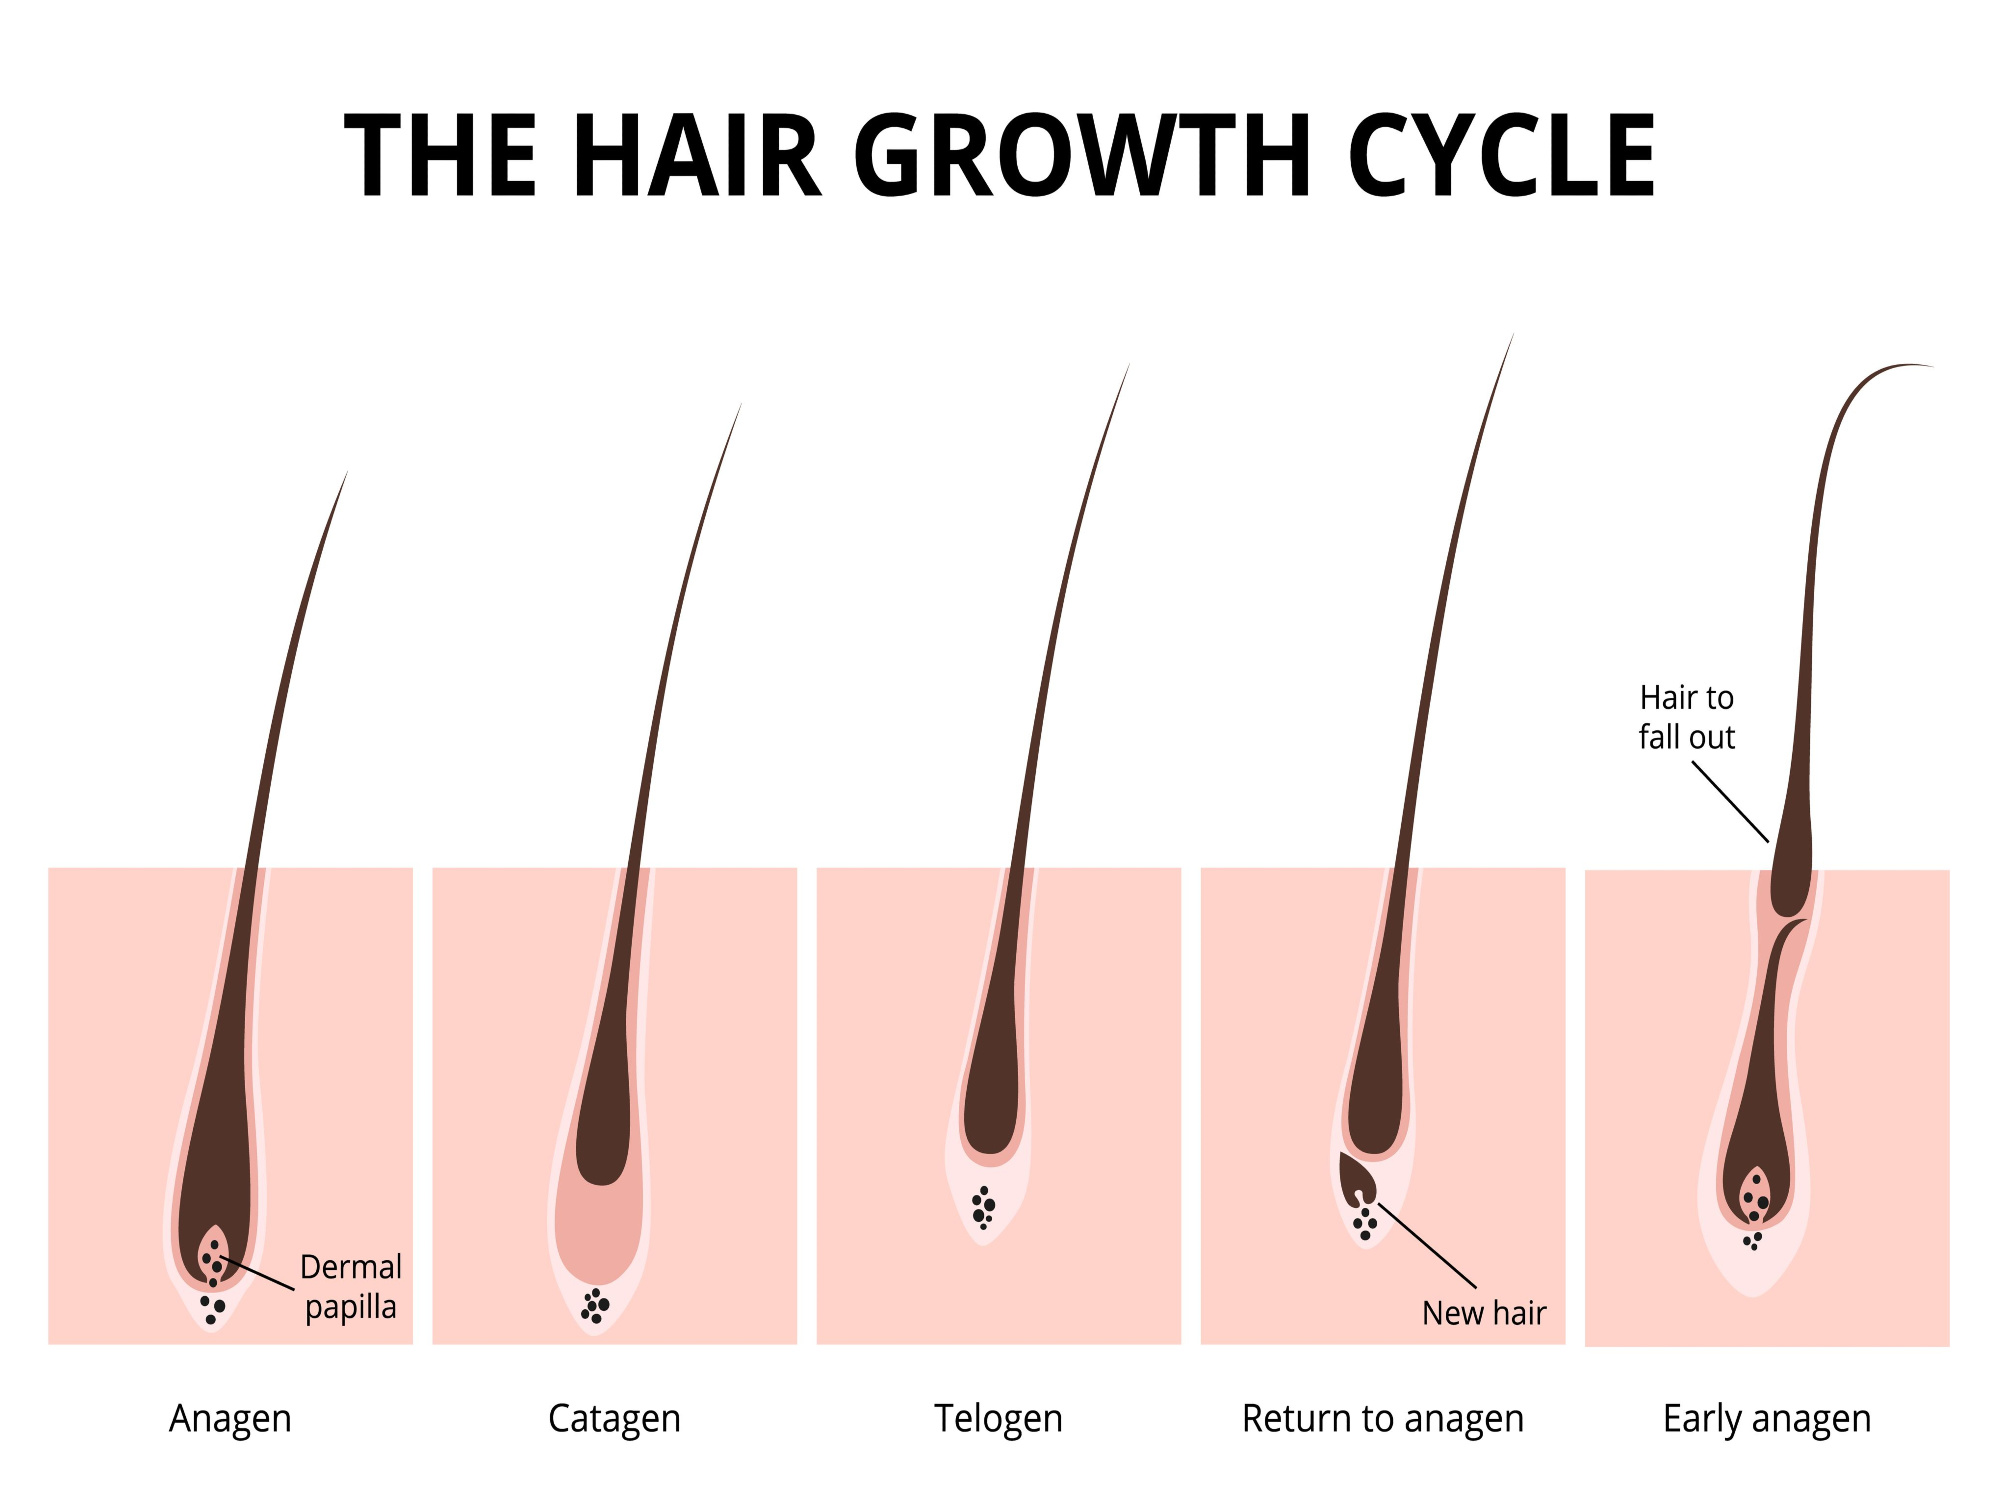 Hair growth cycle and telogen